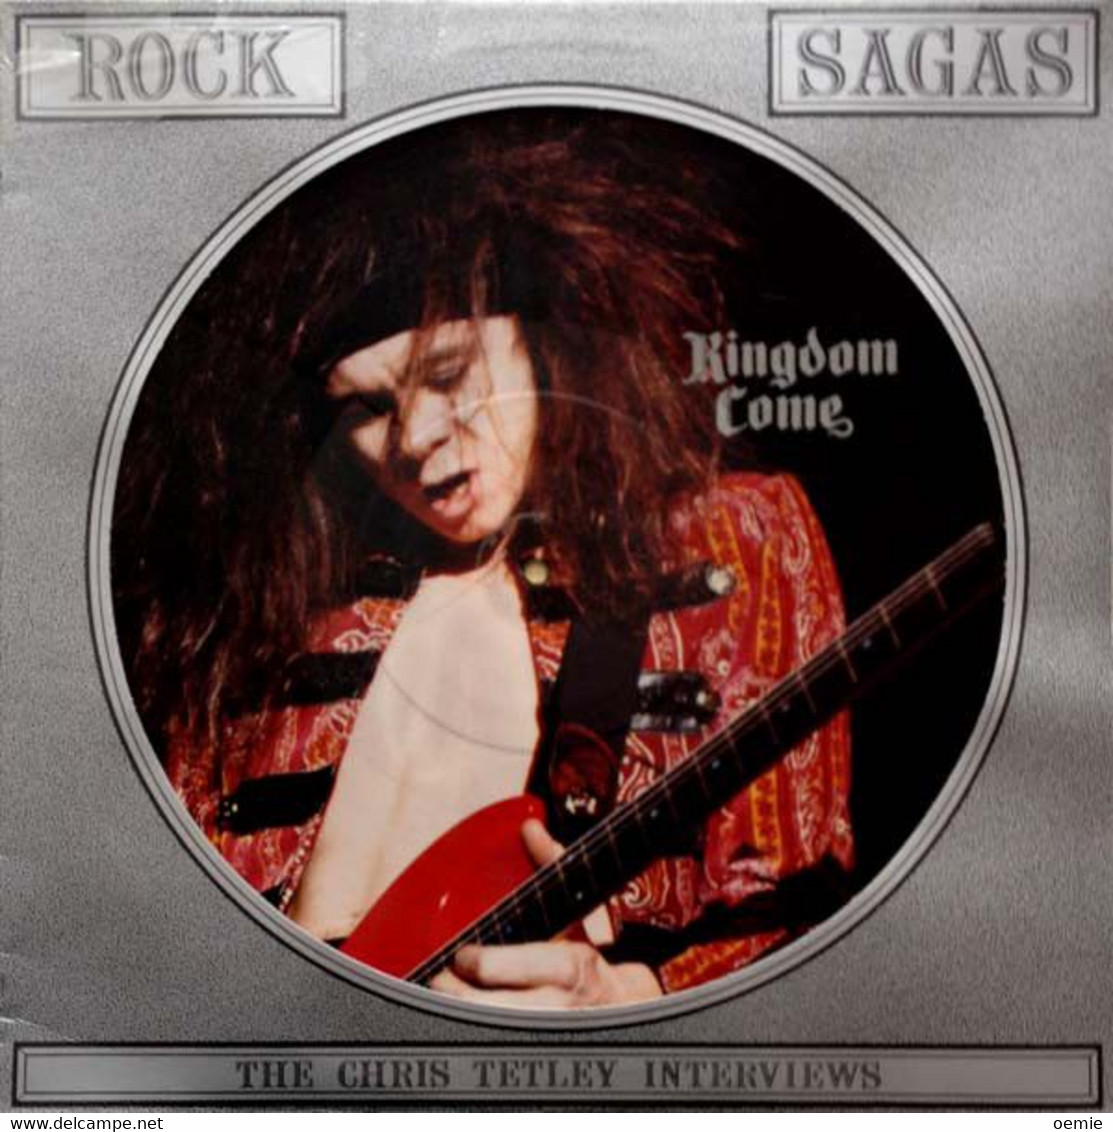 KINDDOM  COME  / ROCK DAGAS  / CRAZY CHRIS TETLEY  / THE ONLY INTERVIEM   PICTURE DISC - Limited Editions